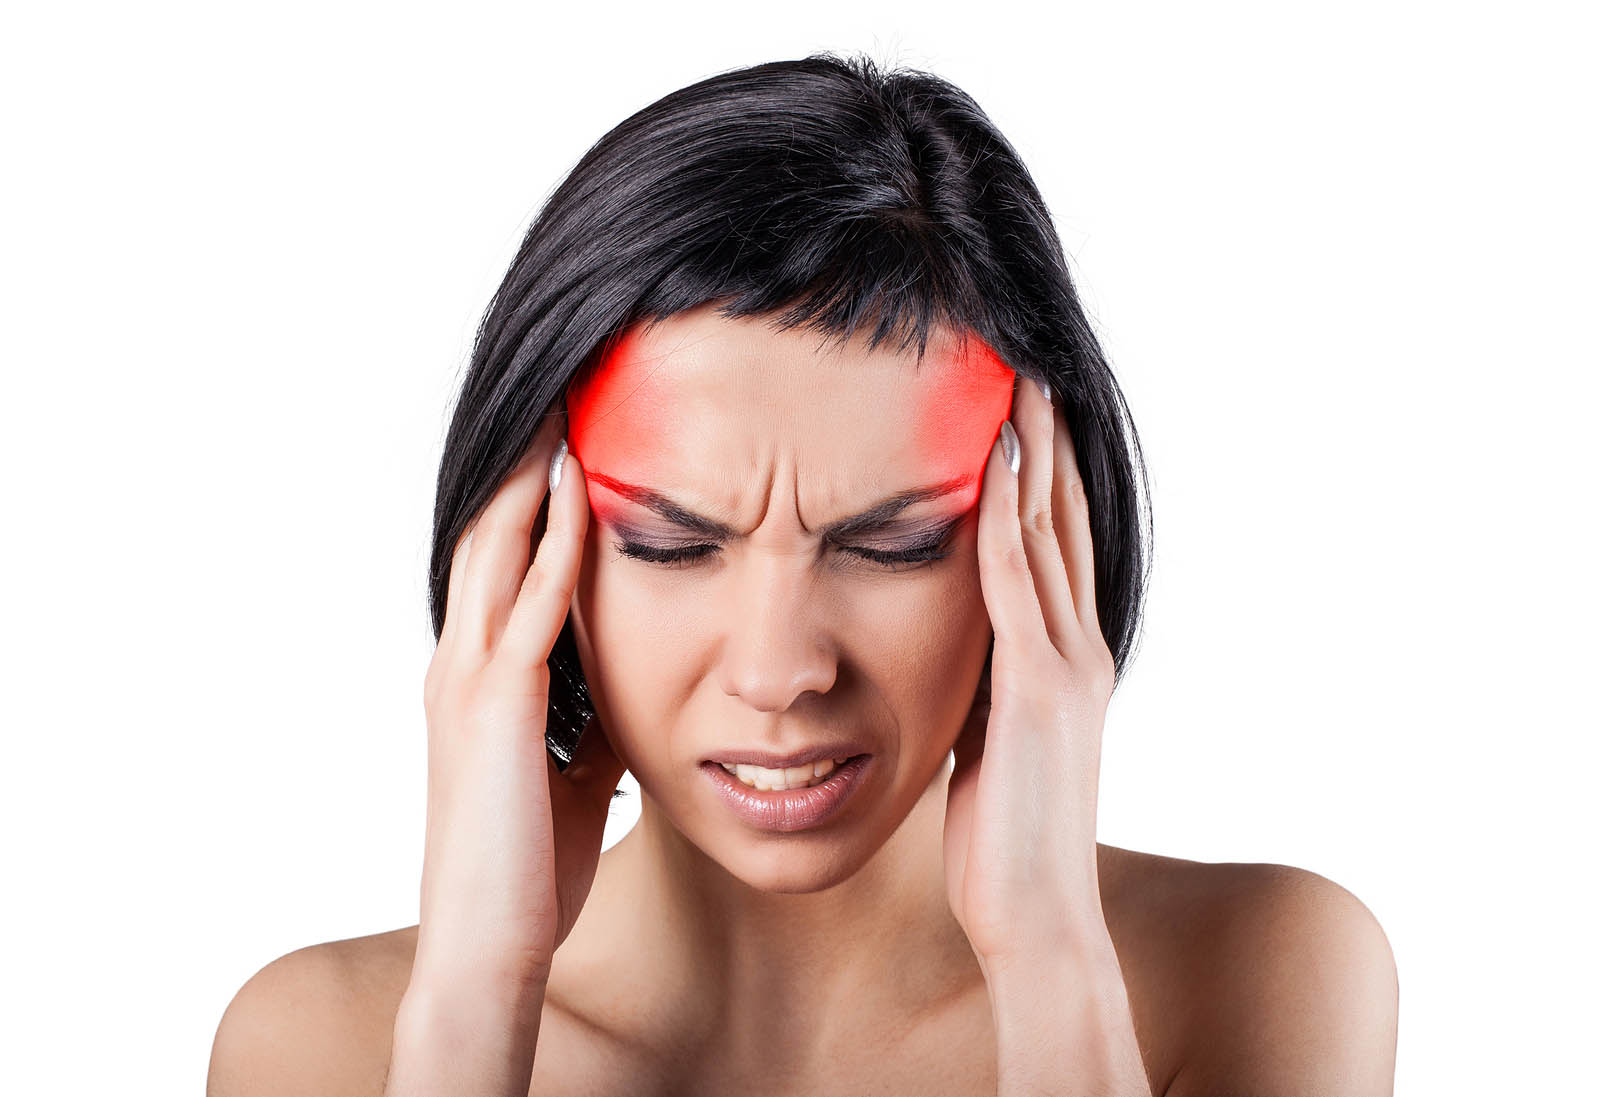 Migraine Treatment with  Louisville KY Chiropractor at Highland Chiropractic with chiropractic adjustments, ultrasound, therapeutic exercises & nutrition